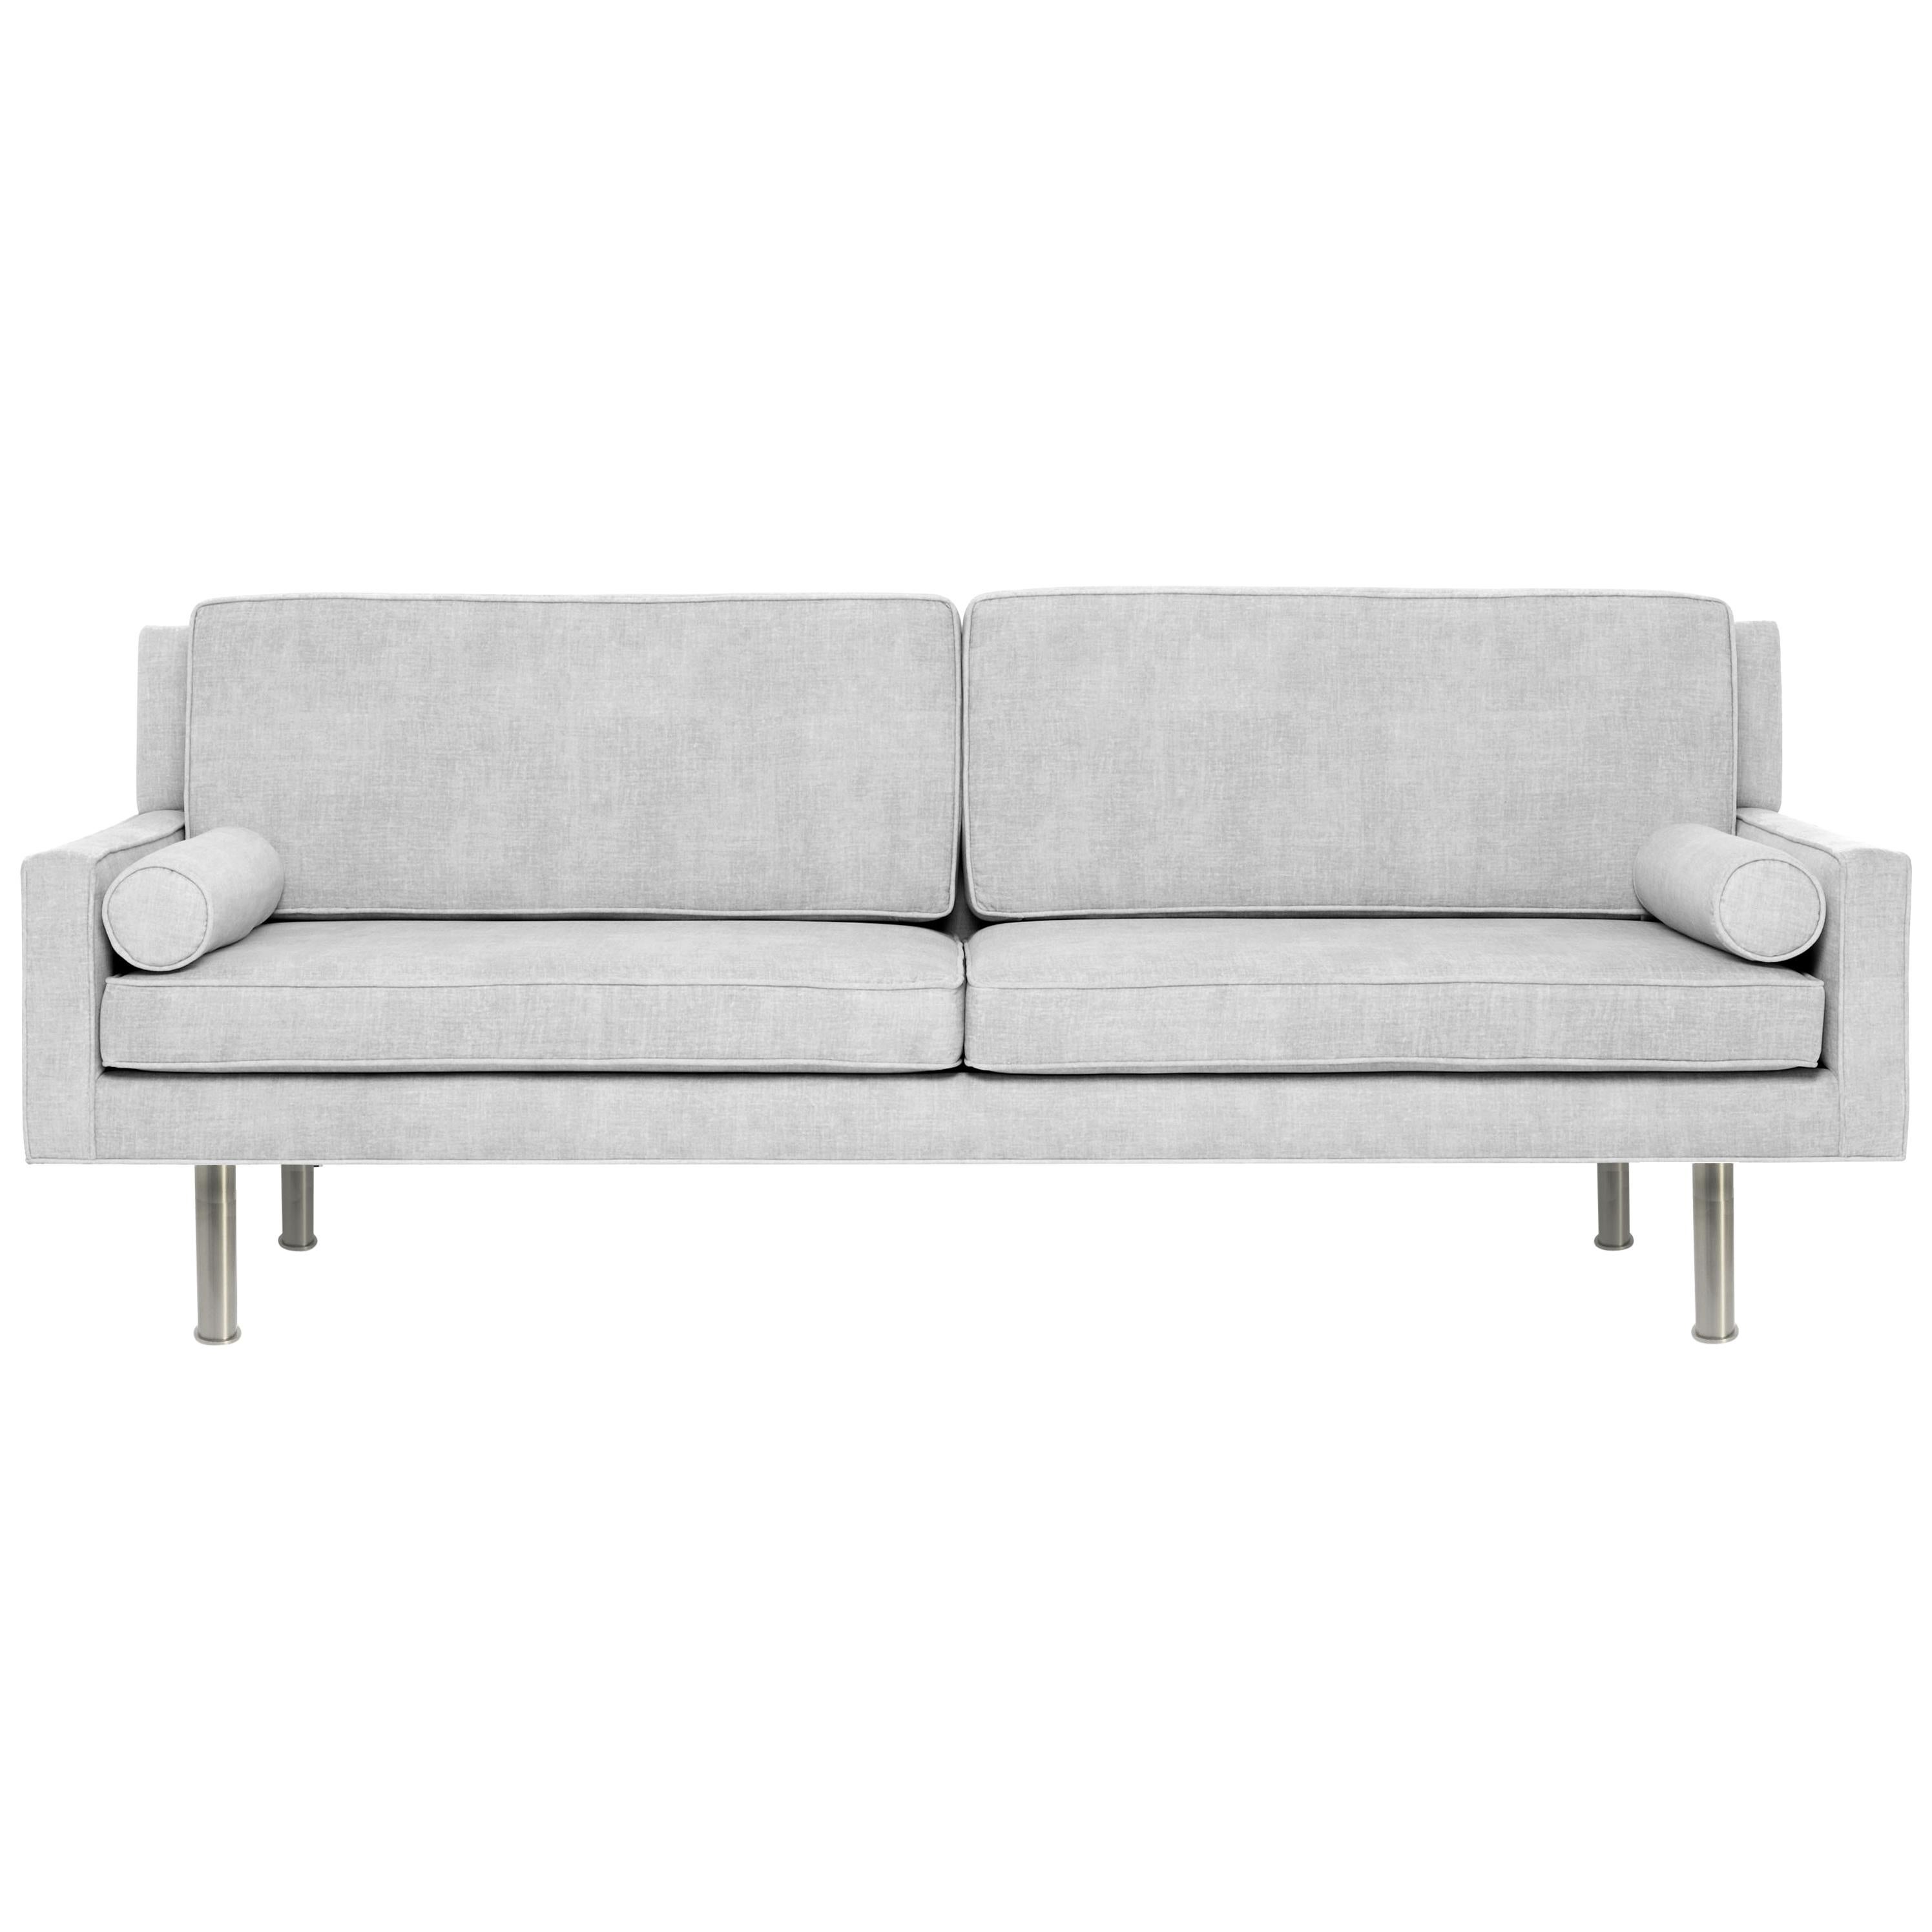 Platform Upholstered Sofa in Wool, Vica designed by Annabelle Selldorf